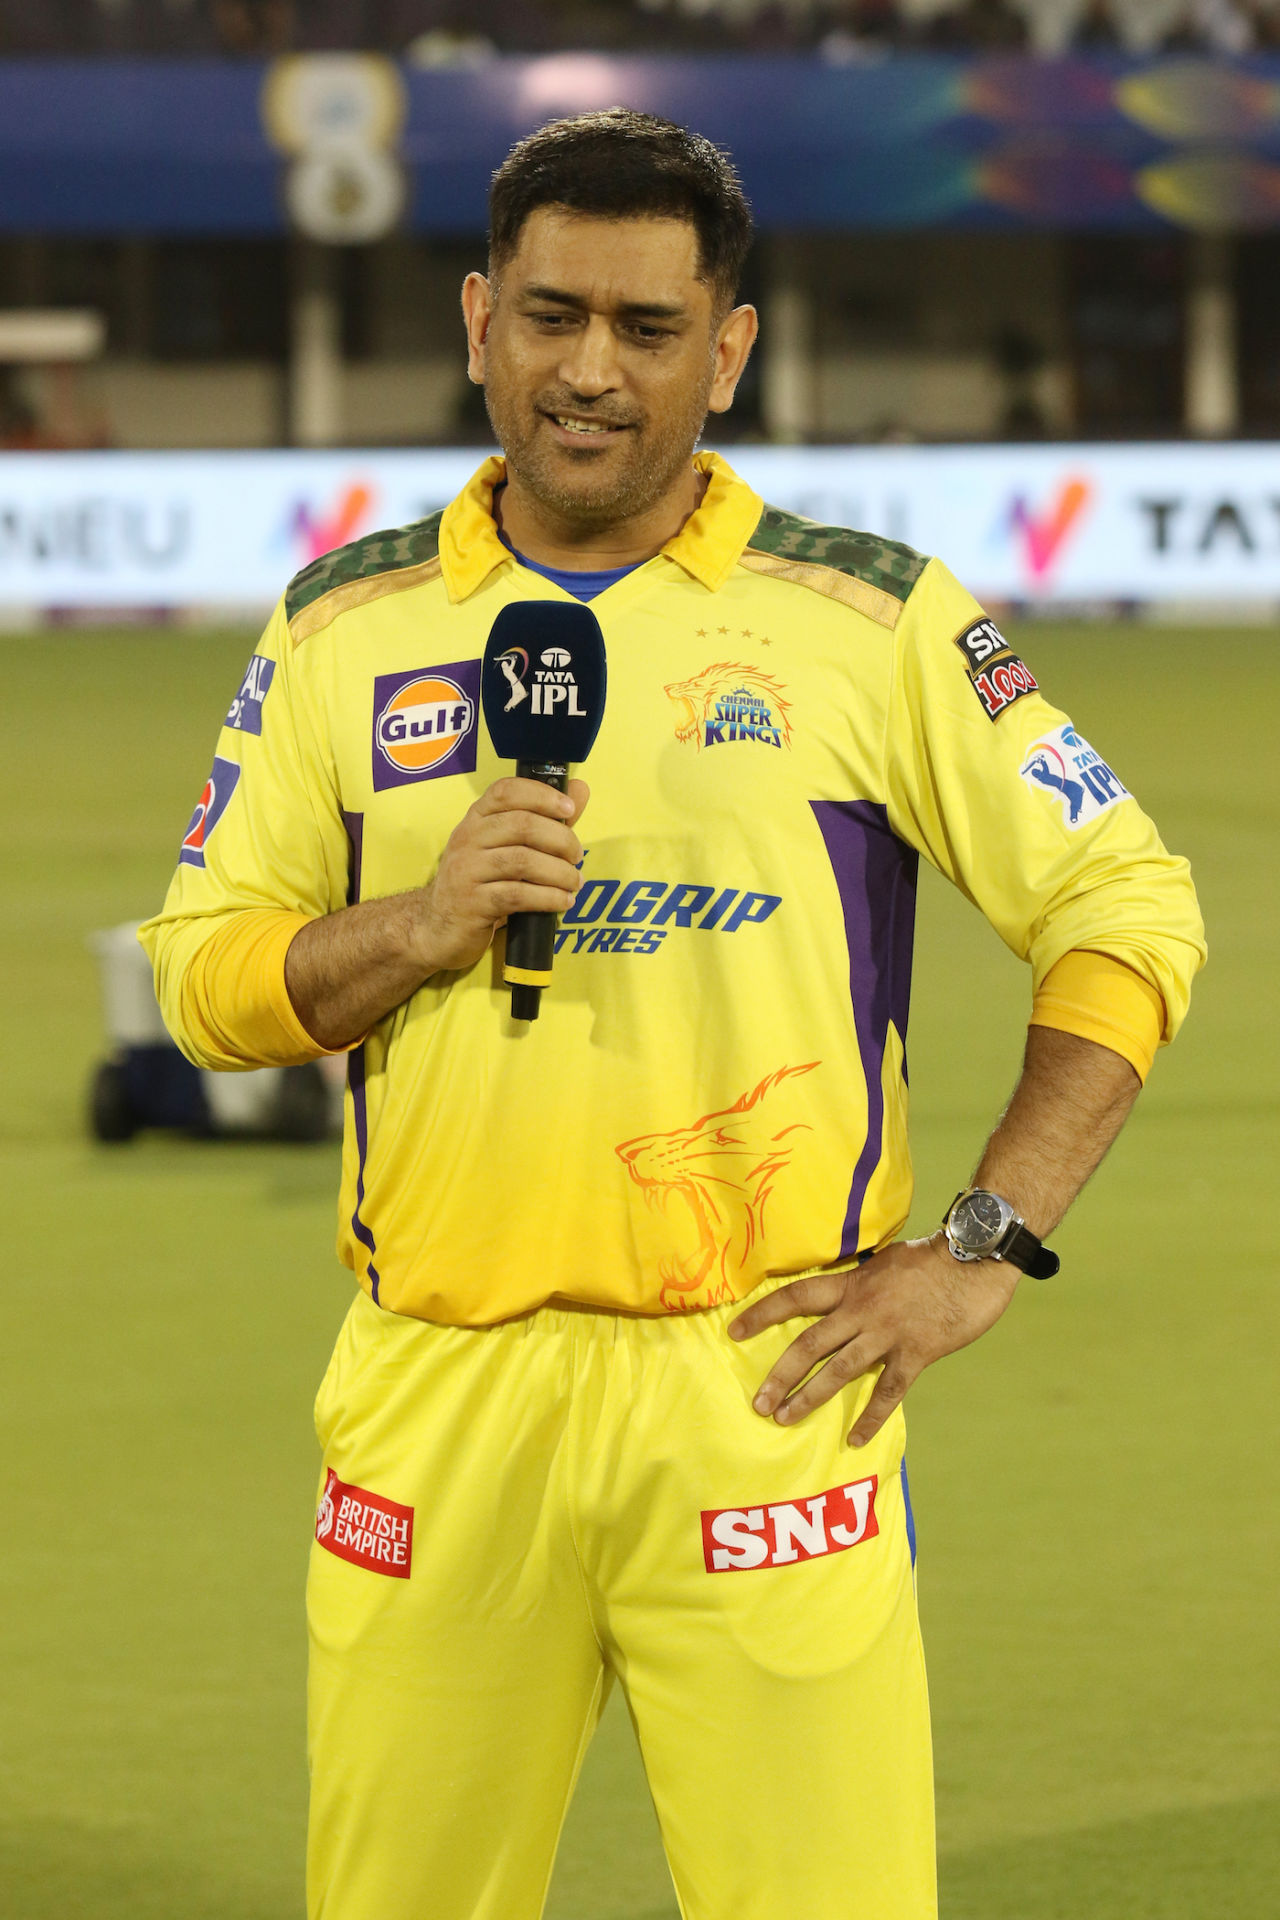 "It will be unfair to not play in Chennai and say thank you" - MS Dhoni will turn out in the CSK yellow next season too, Chennai Super Kings vs Rajasthan Royals, IPL 2022, Brabourne Stadium, Mumbai, May 20, 2022